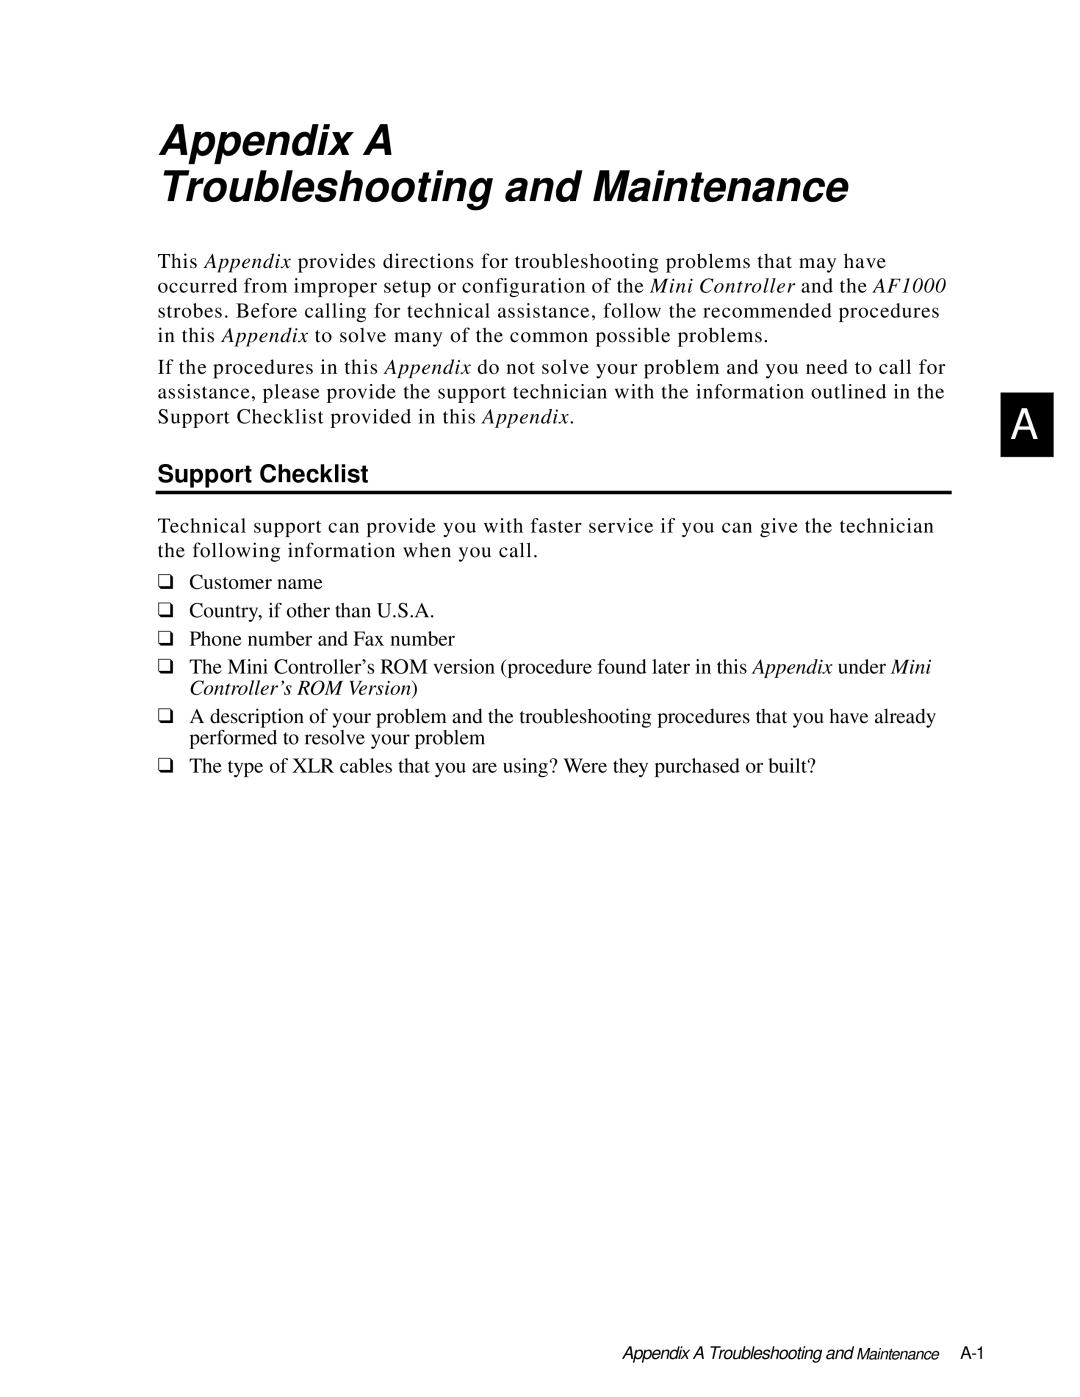 High End Systems AF1000 user manual Appendix A Troubleshooting and Maintenance, Support Checklist 